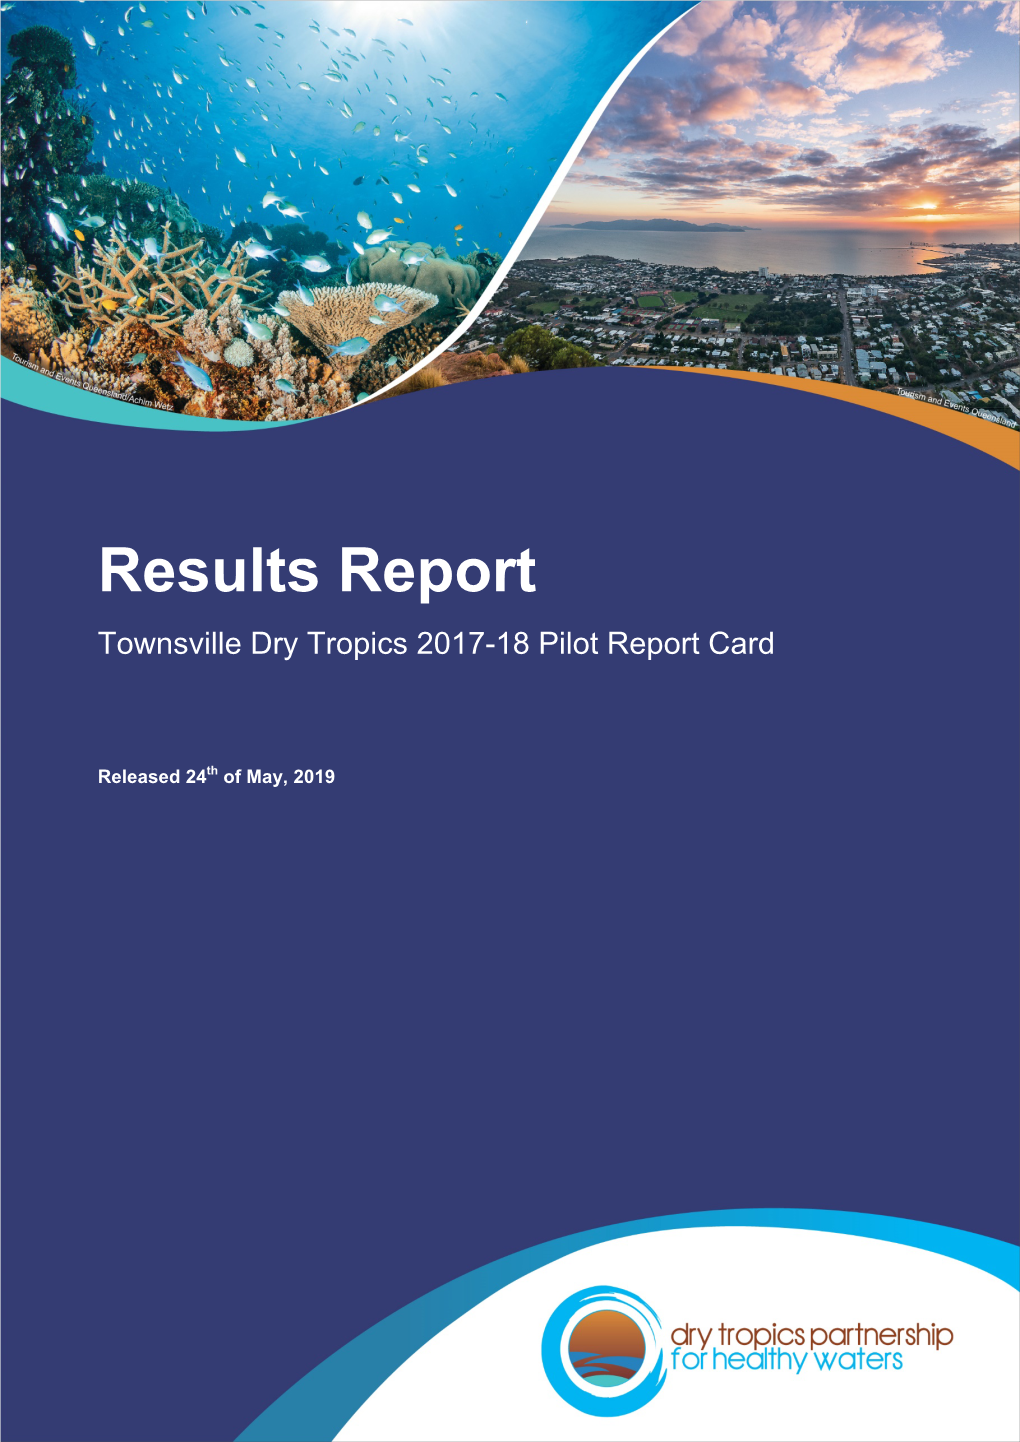 Results Report Townsville Dry Tropics 2017-18 Pilot Report Card